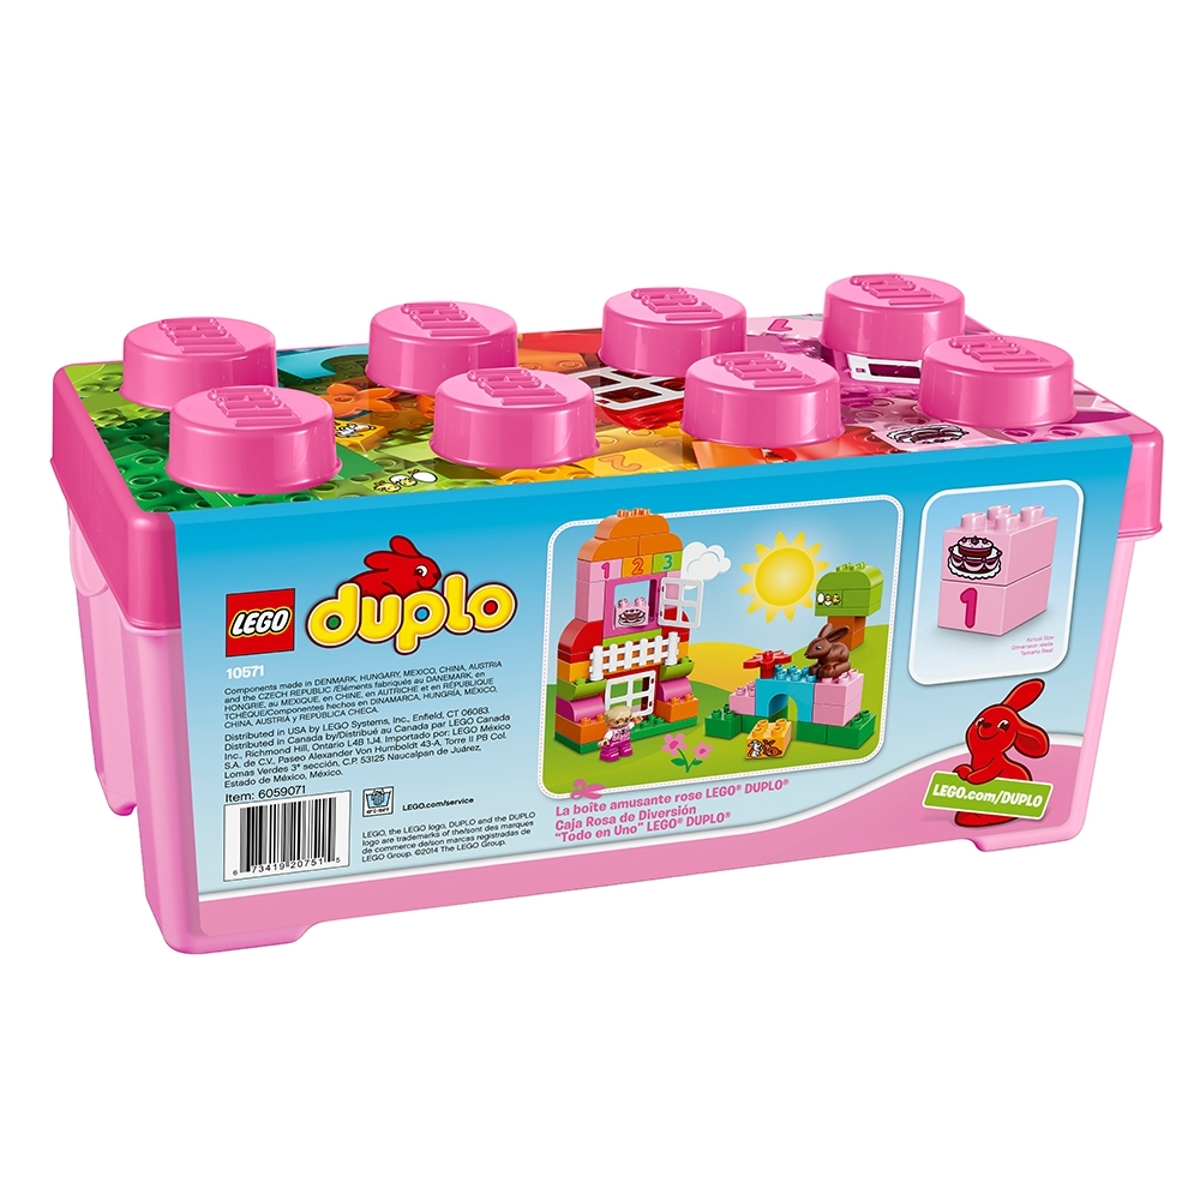 duplo 10571 all in one pink box of fun